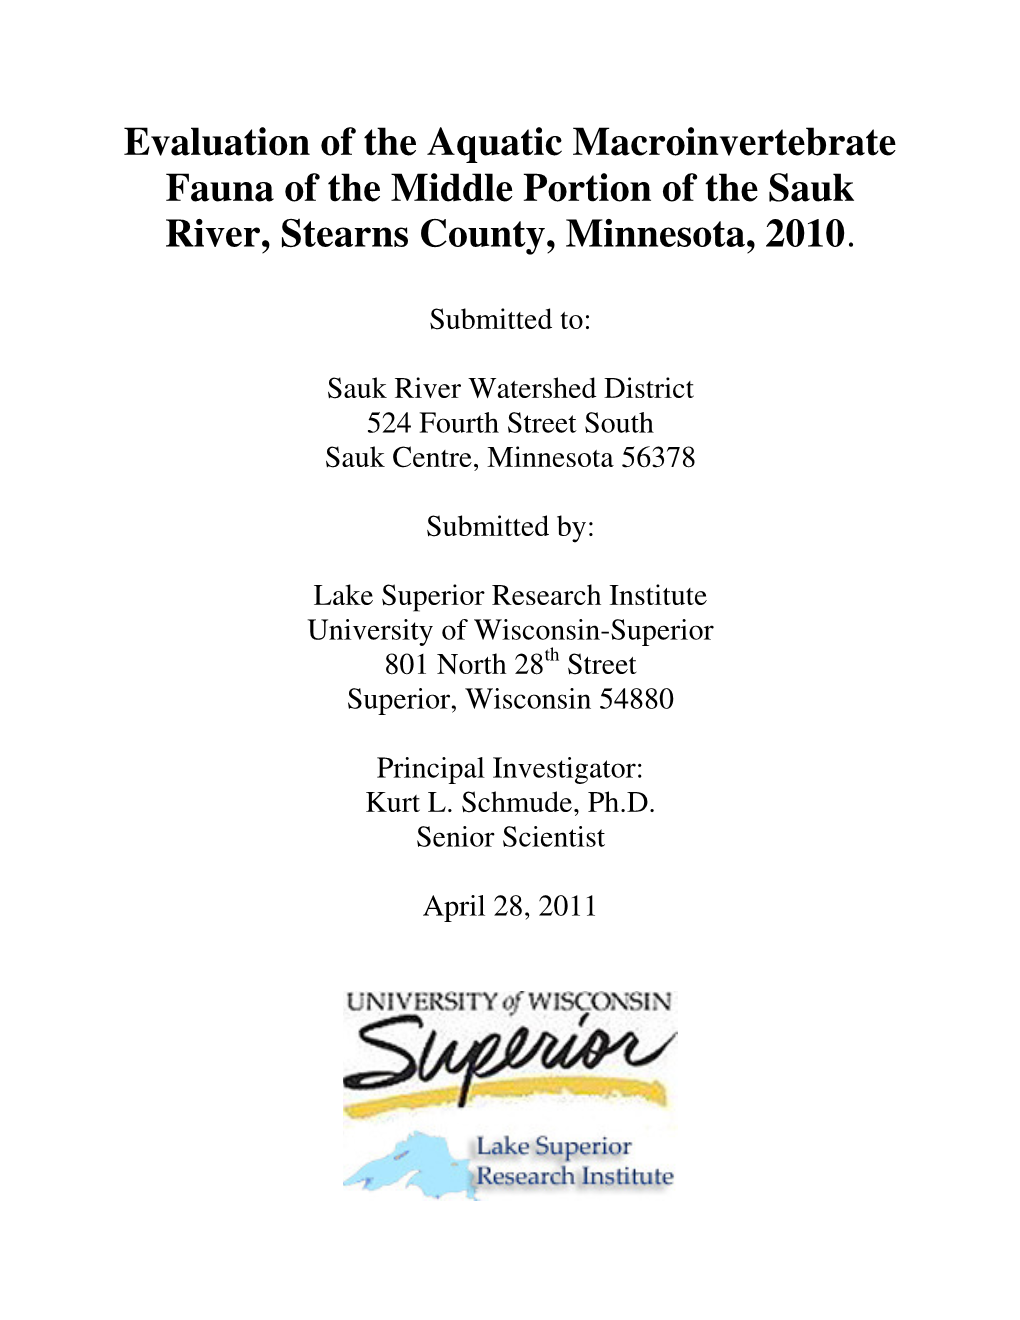 Evaluation of the Aquatic Macroinvertebrate Fauna of the Middle Portion of the Sauk River, Stearns County, Minnesota, 2010